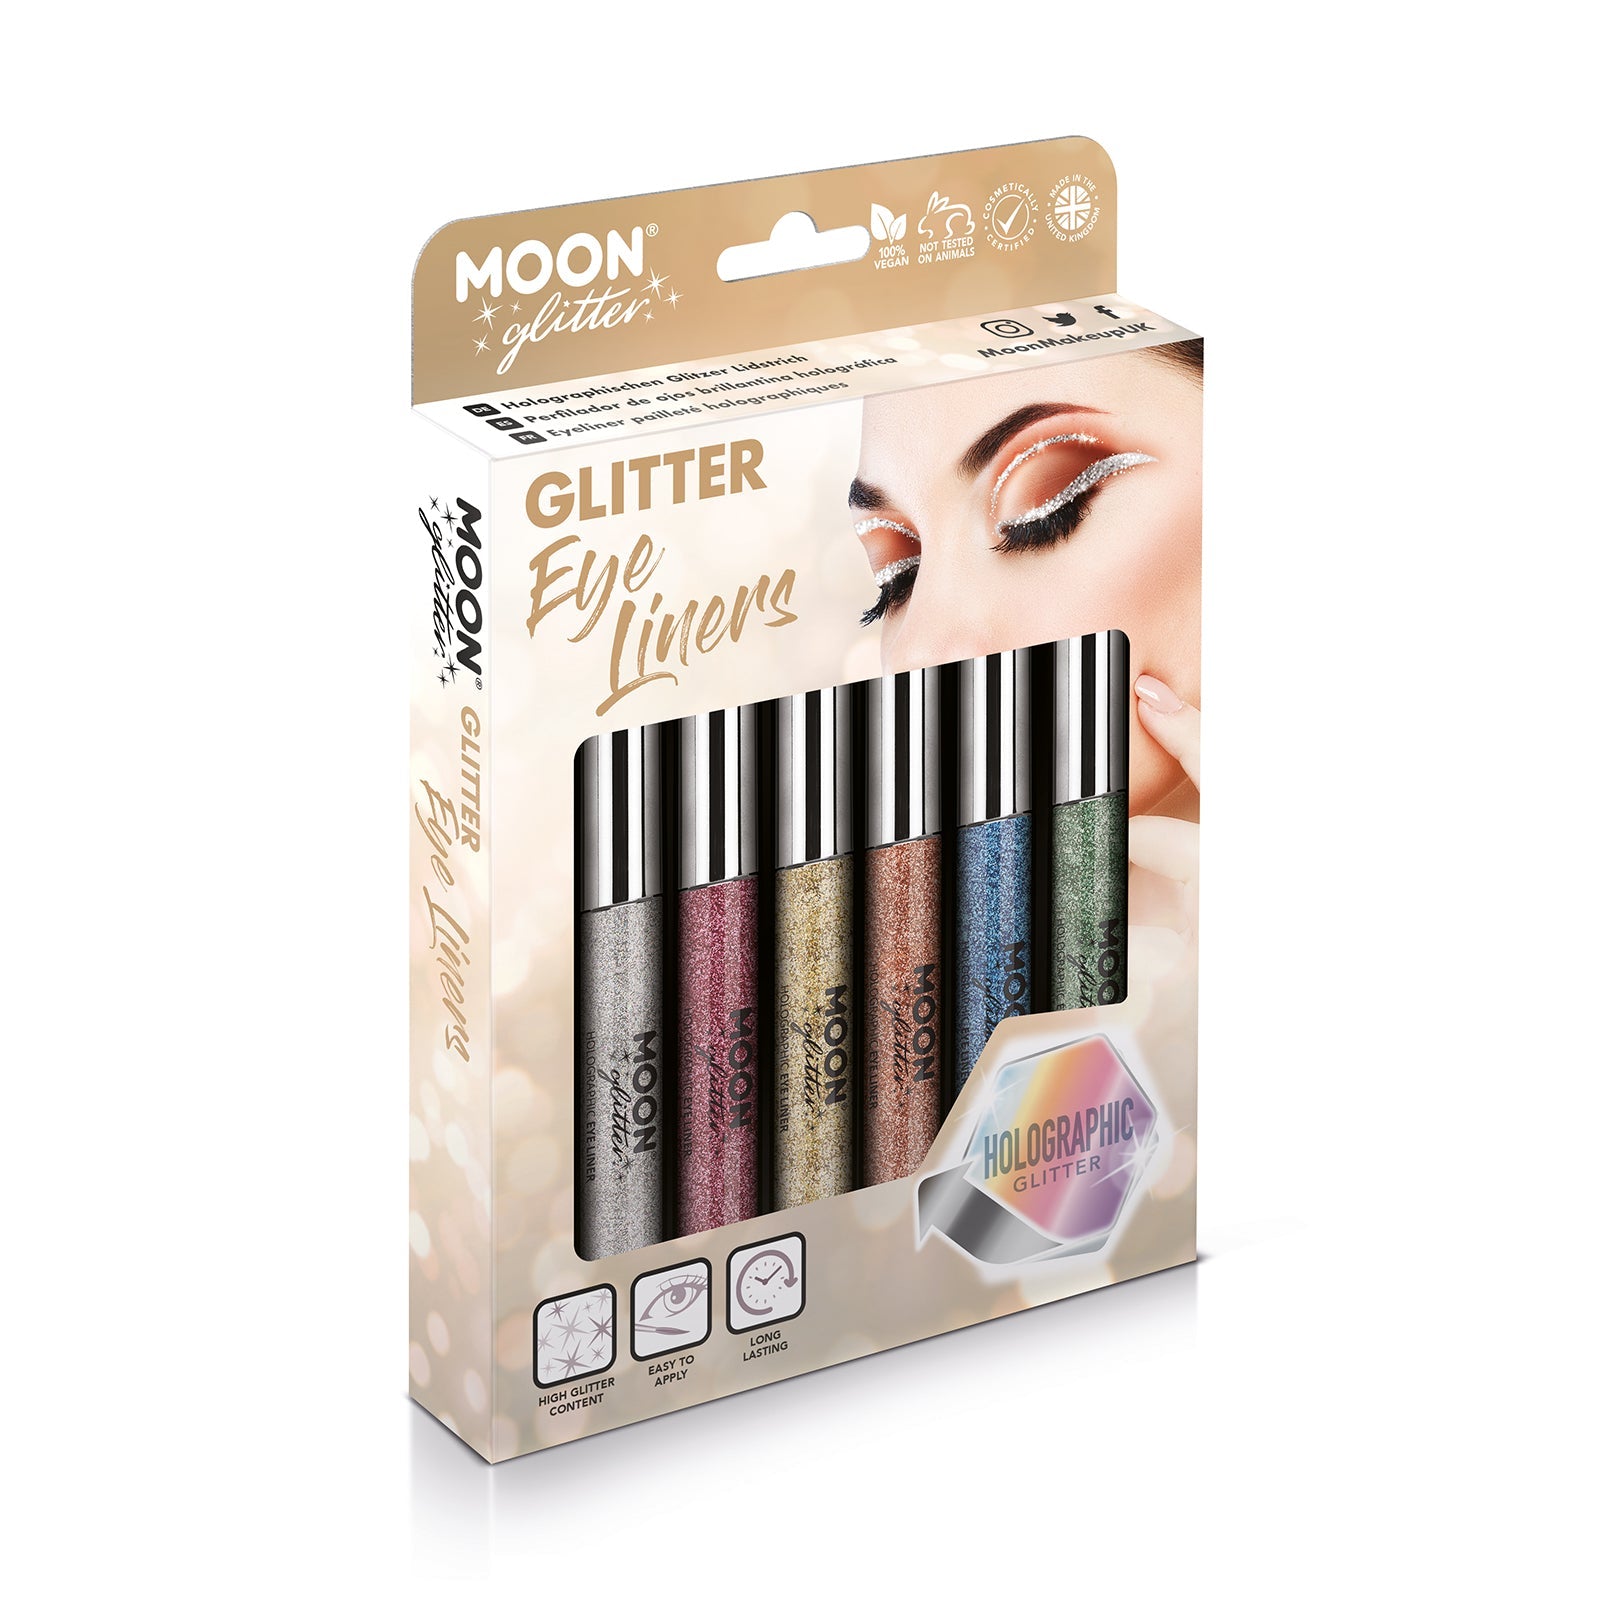 Holographic Glitter Eyeliner Boxset - 6 Eyeliner. Cosmetically certified, FDA & Health Canada compliant, cruelty free and vegan.